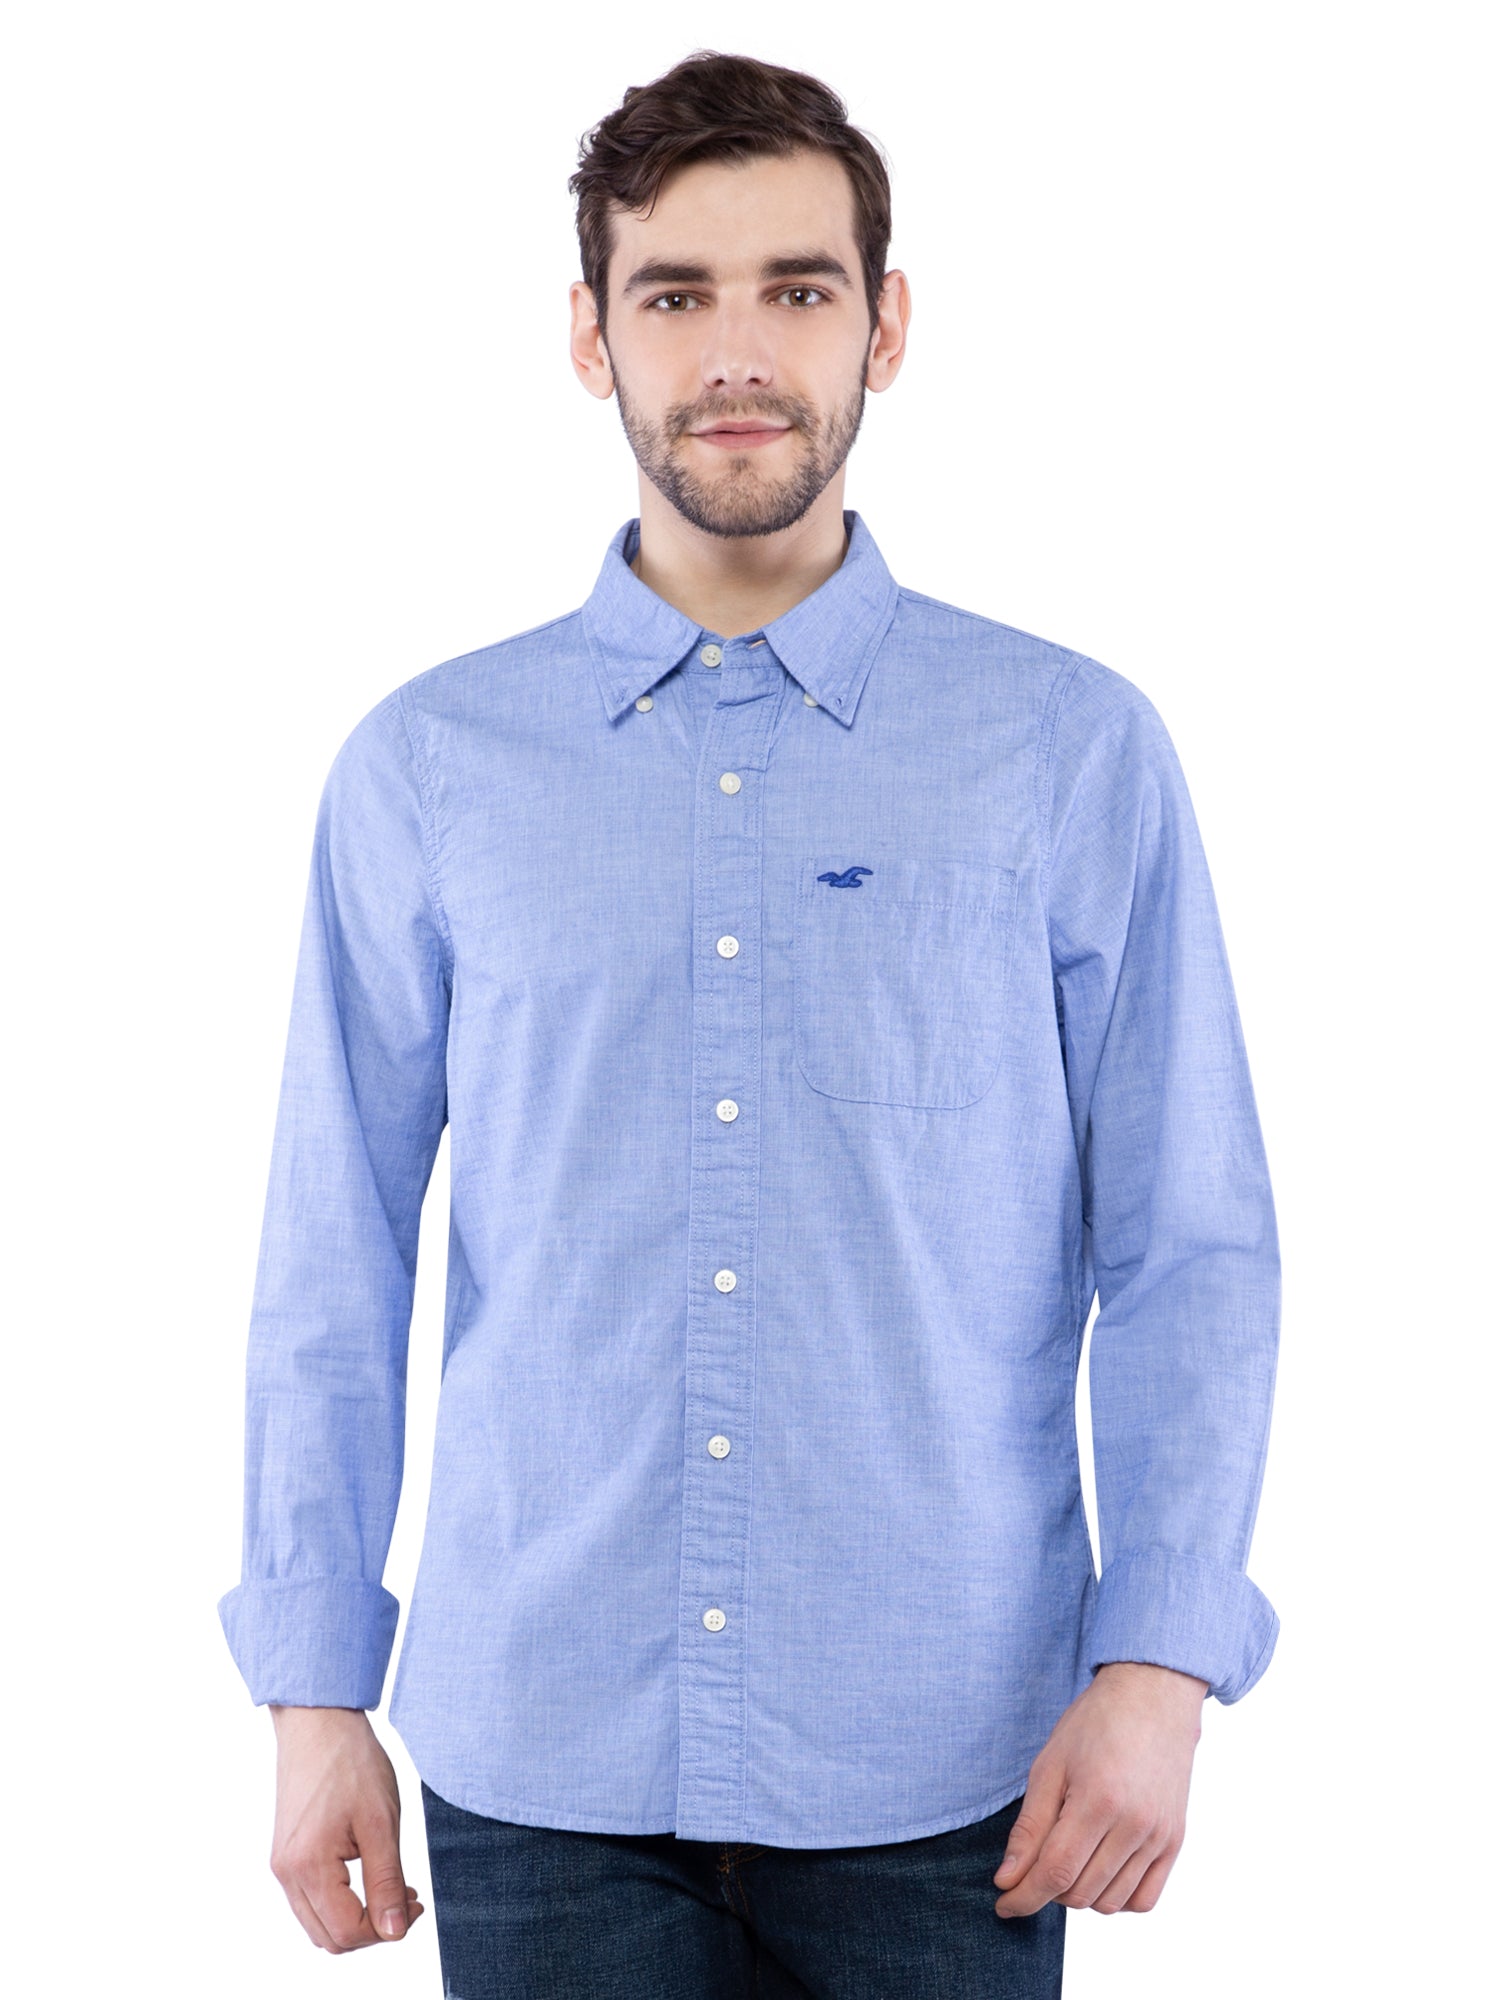 Hollister Long Sleeve for Men sale - discounted price